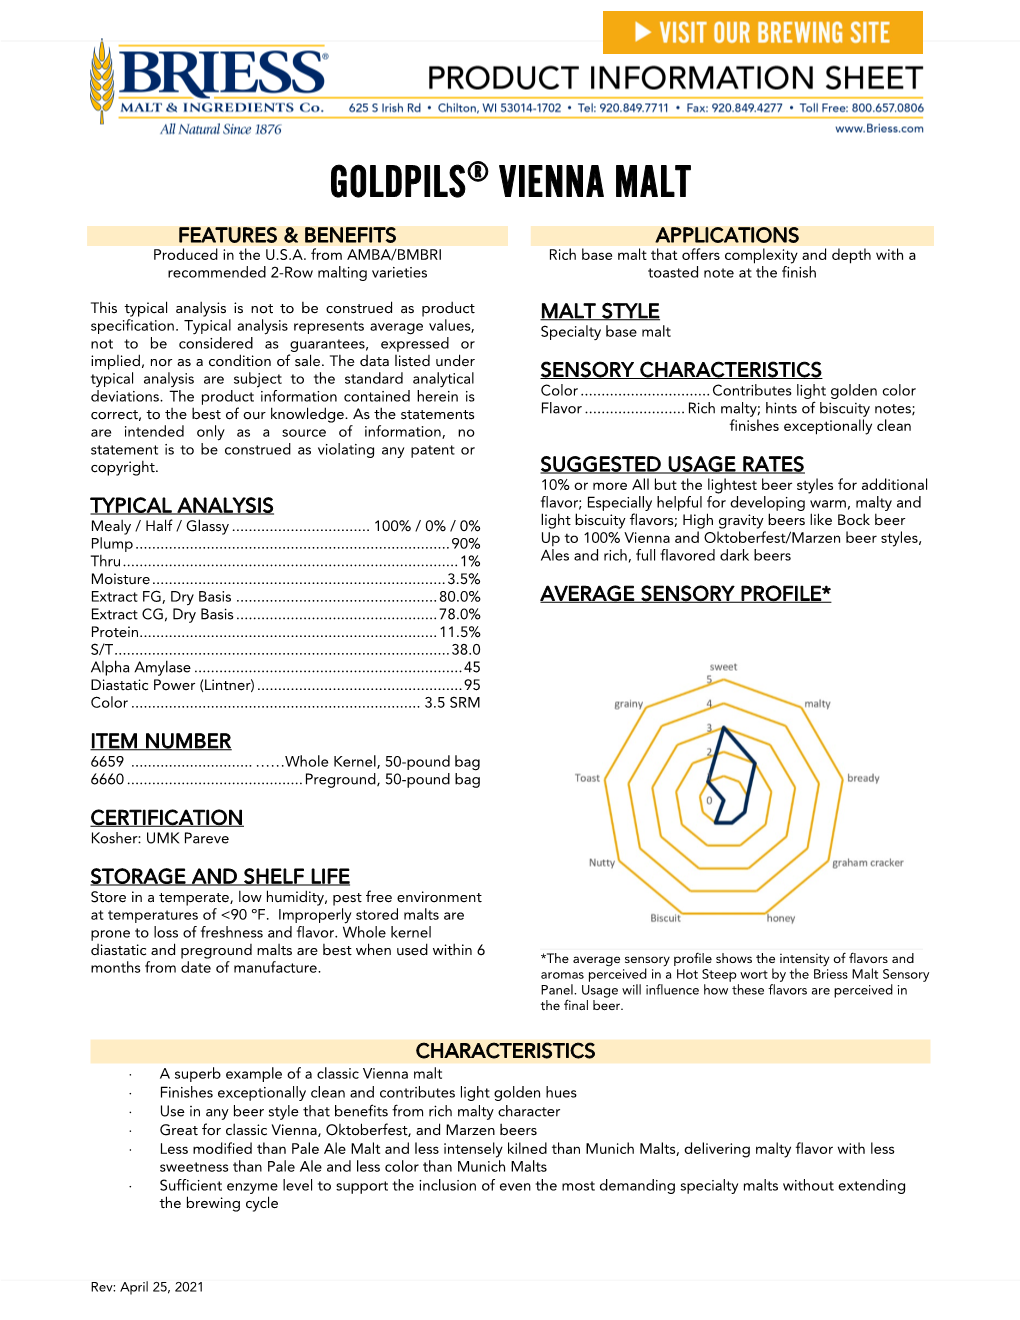 GOLDPILS® VIENNA MALT FEATURES & BENEFITS APPLICATIONS Produced in the U.S.A